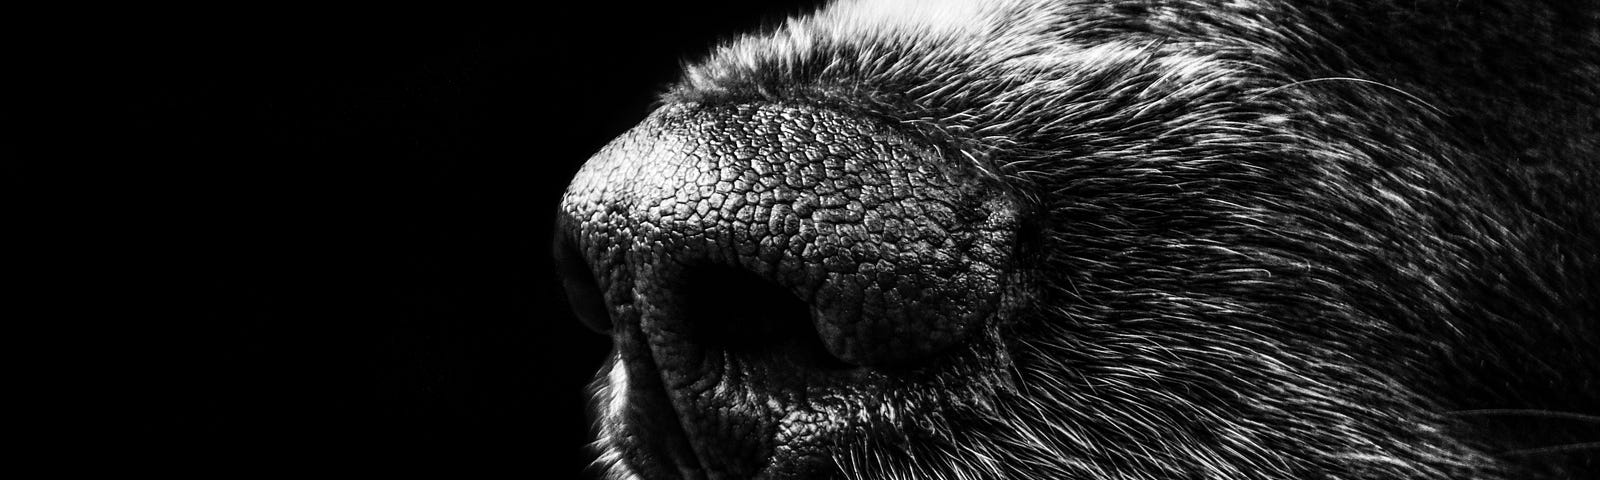 Black and white photo of a dog’s nose.